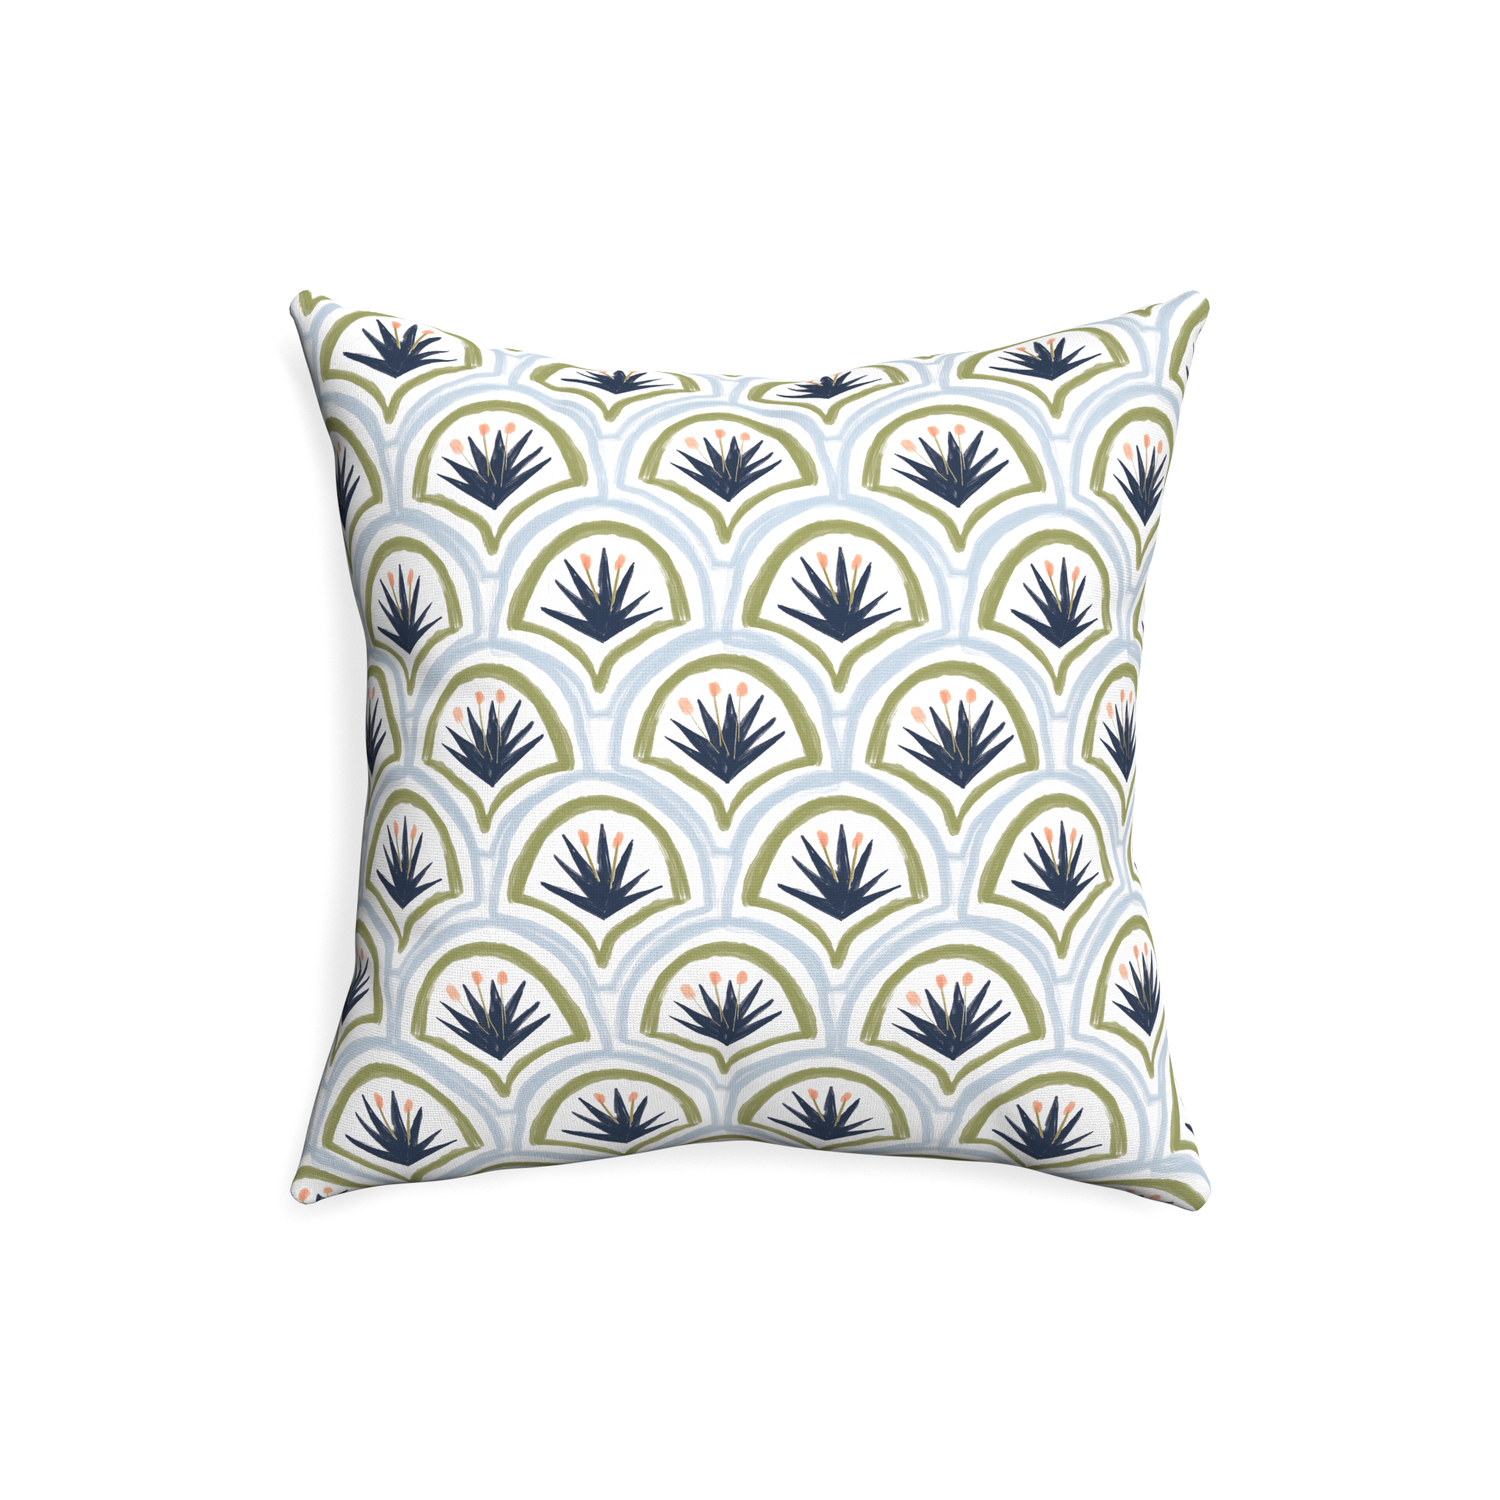 20-square thatcher midnight custom art deco palm patternpillow with none on white background